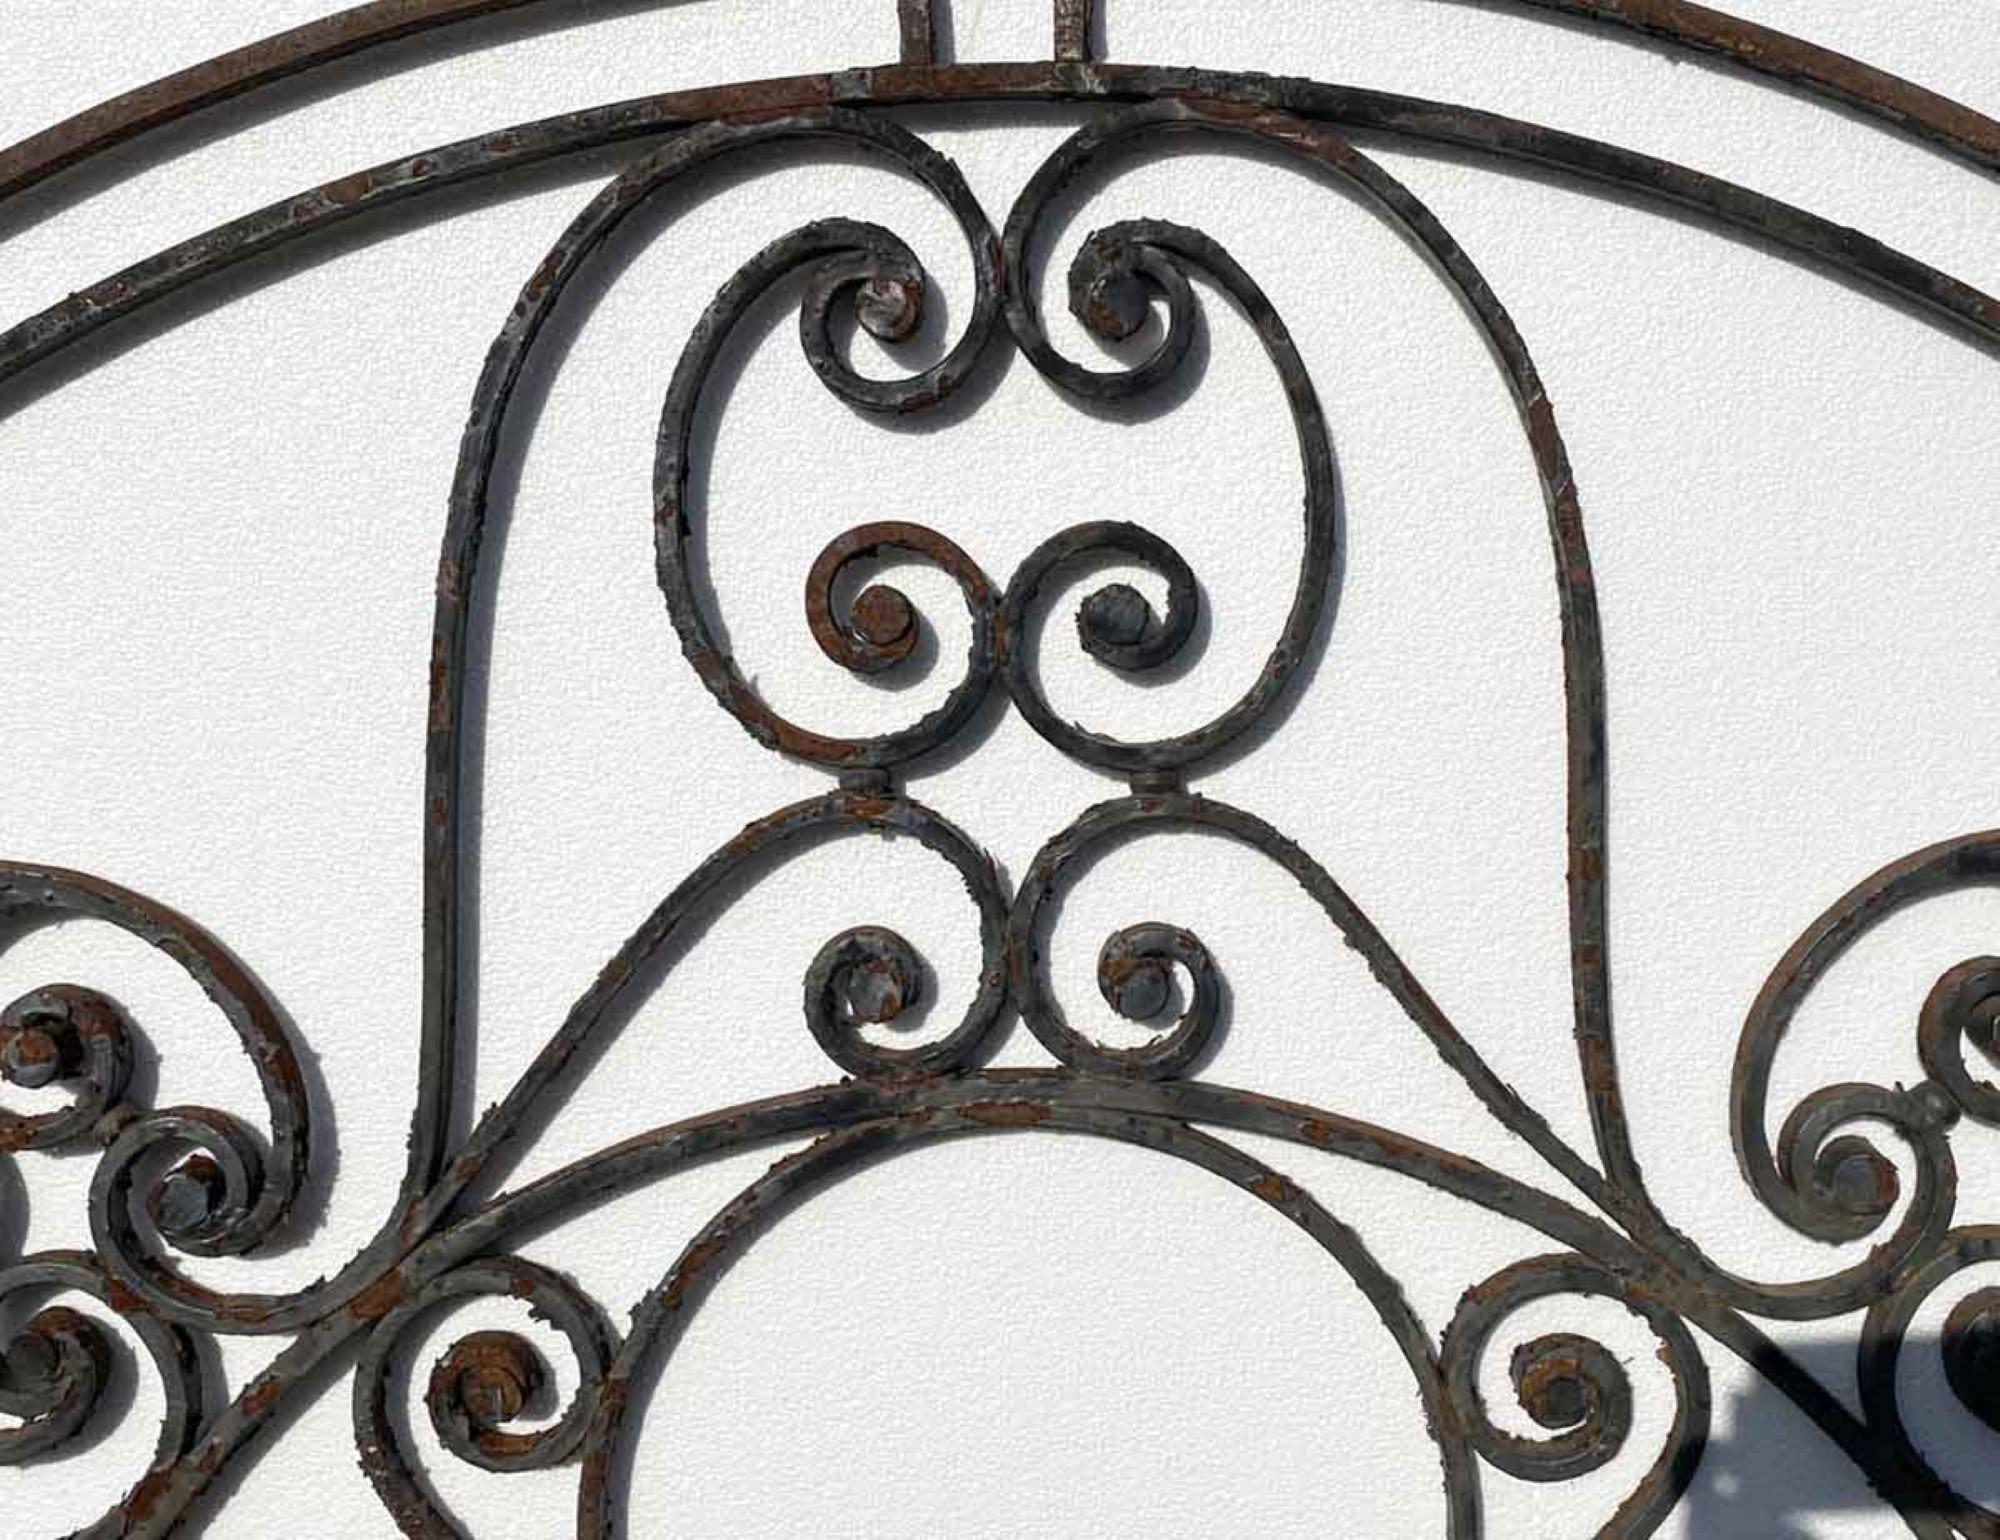 Large wrought iron door transom with hand forged curls from the 1890s. This can be seen at our 1800 South Grand Ave location in Downtown Los Angeles.